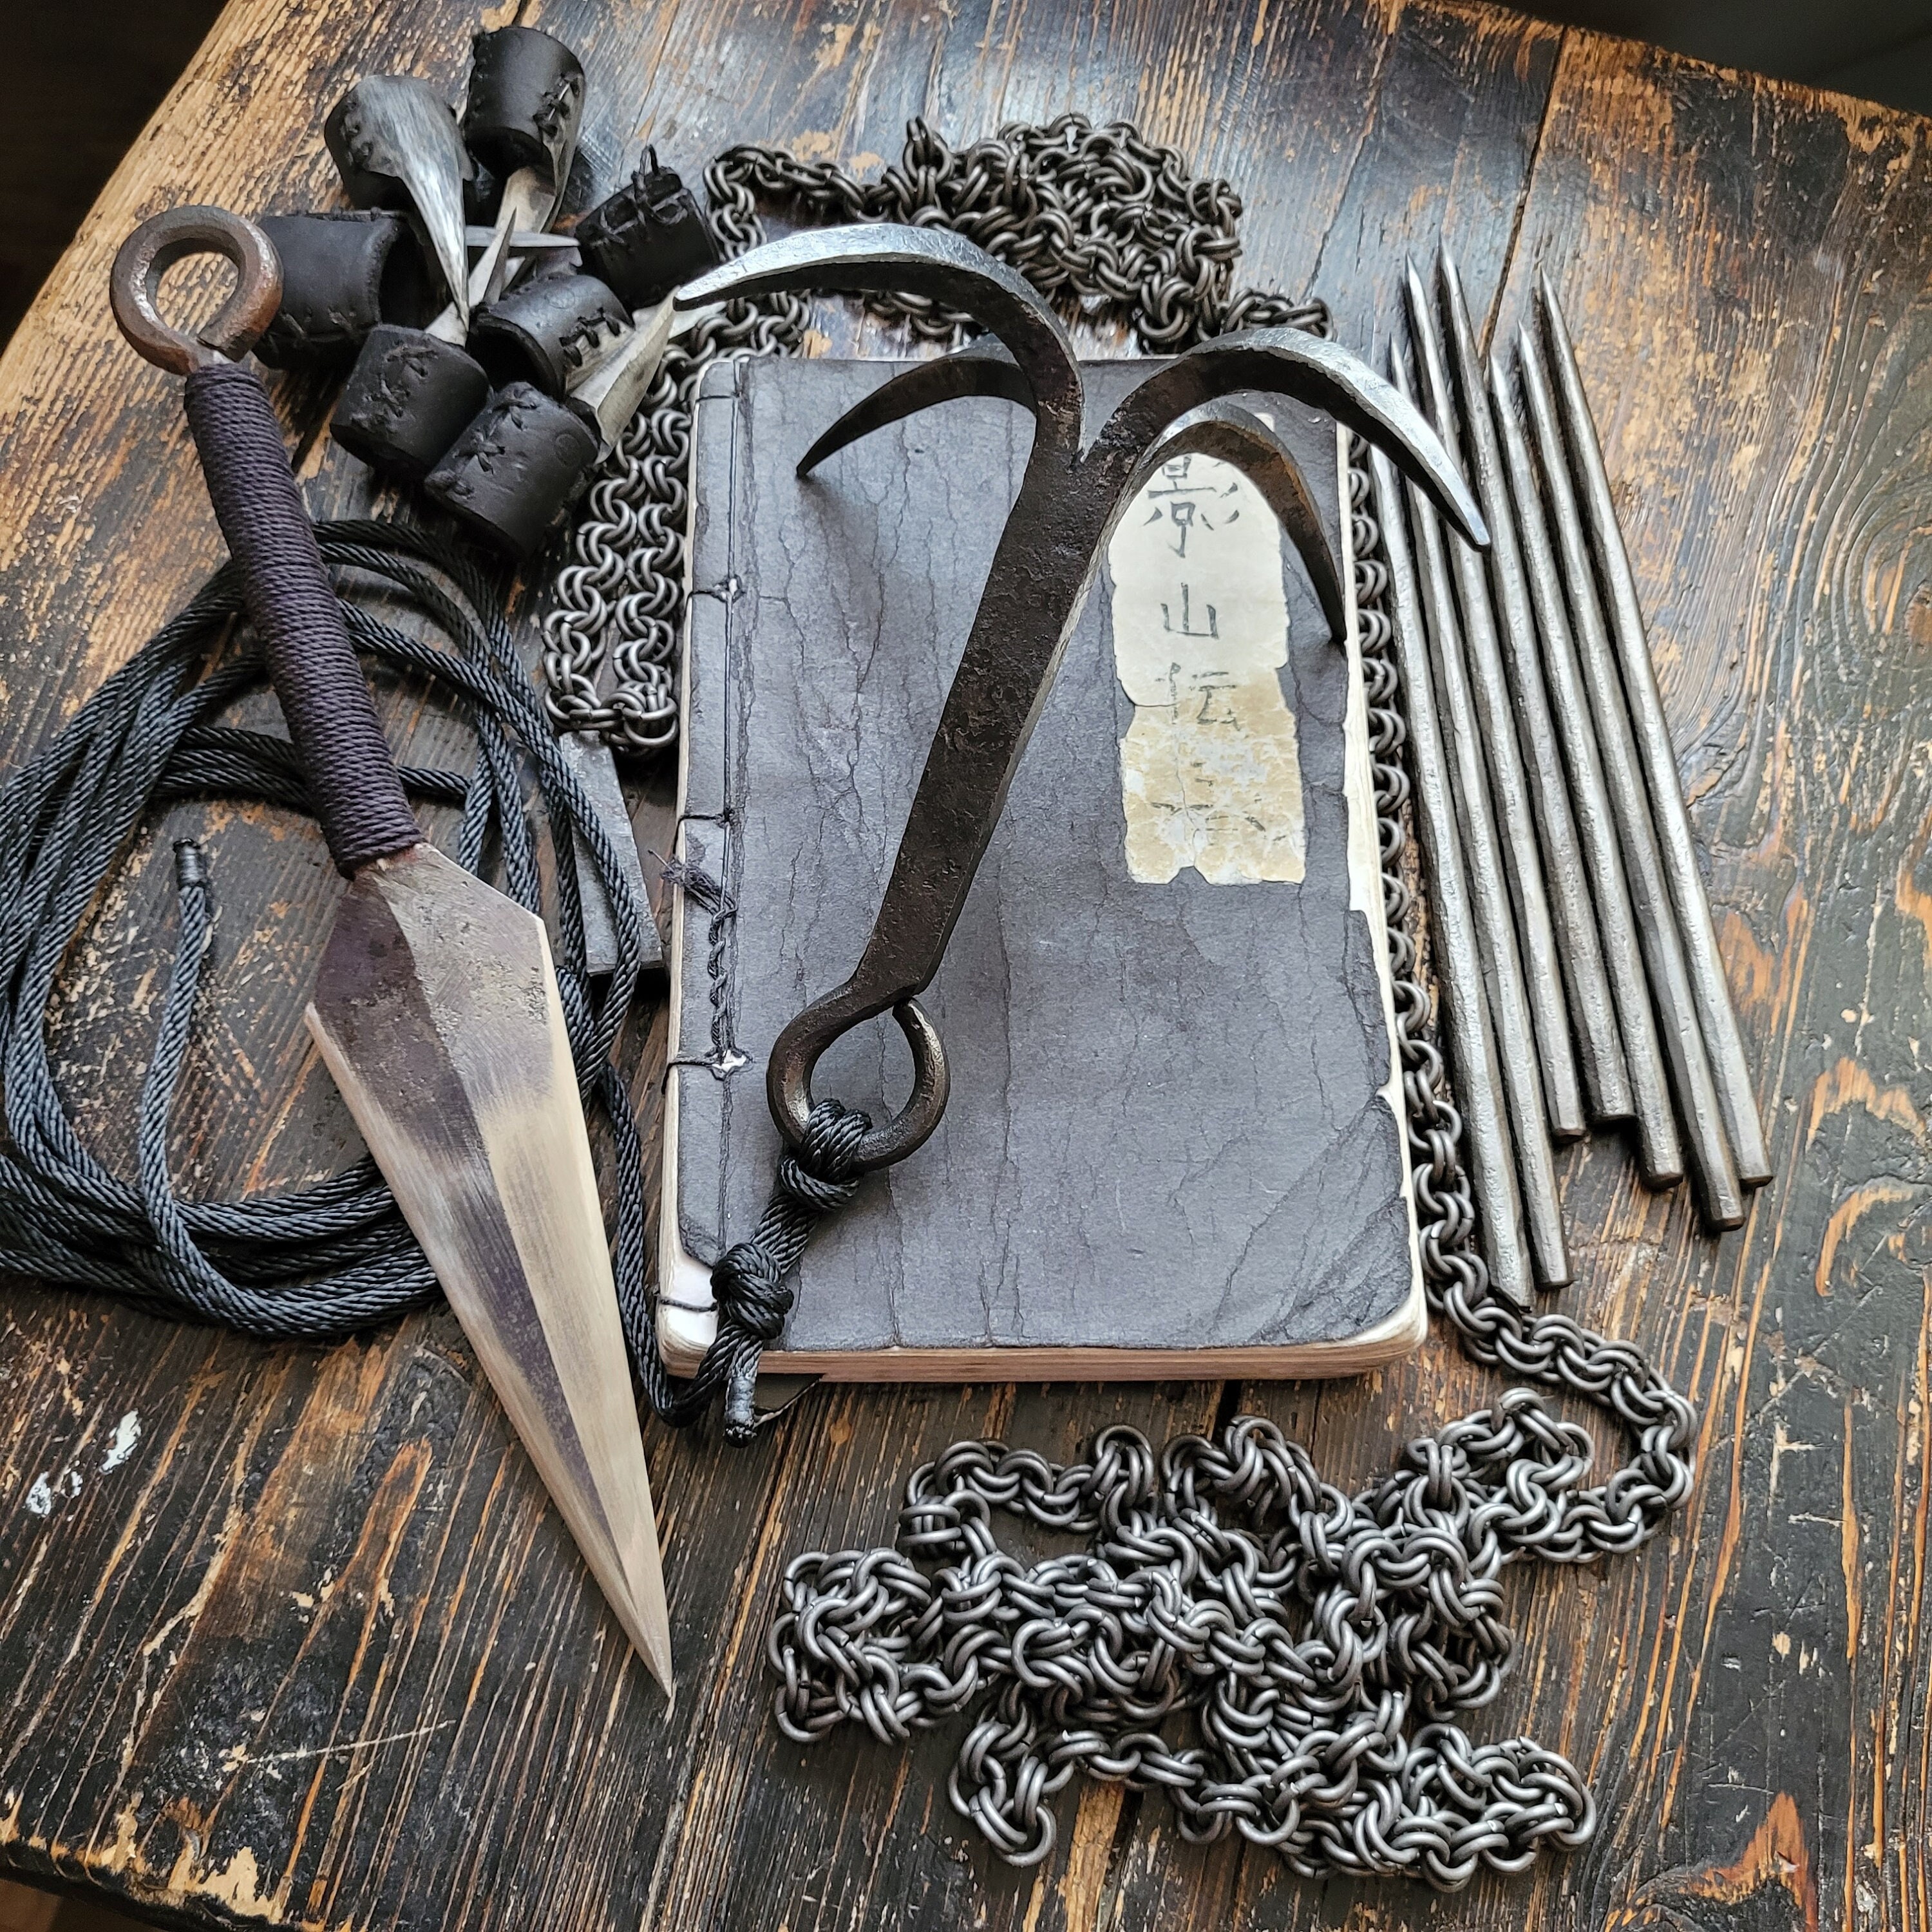 Steel Grappling Hook Forged in a Traditional Style of Ninjutsu. 